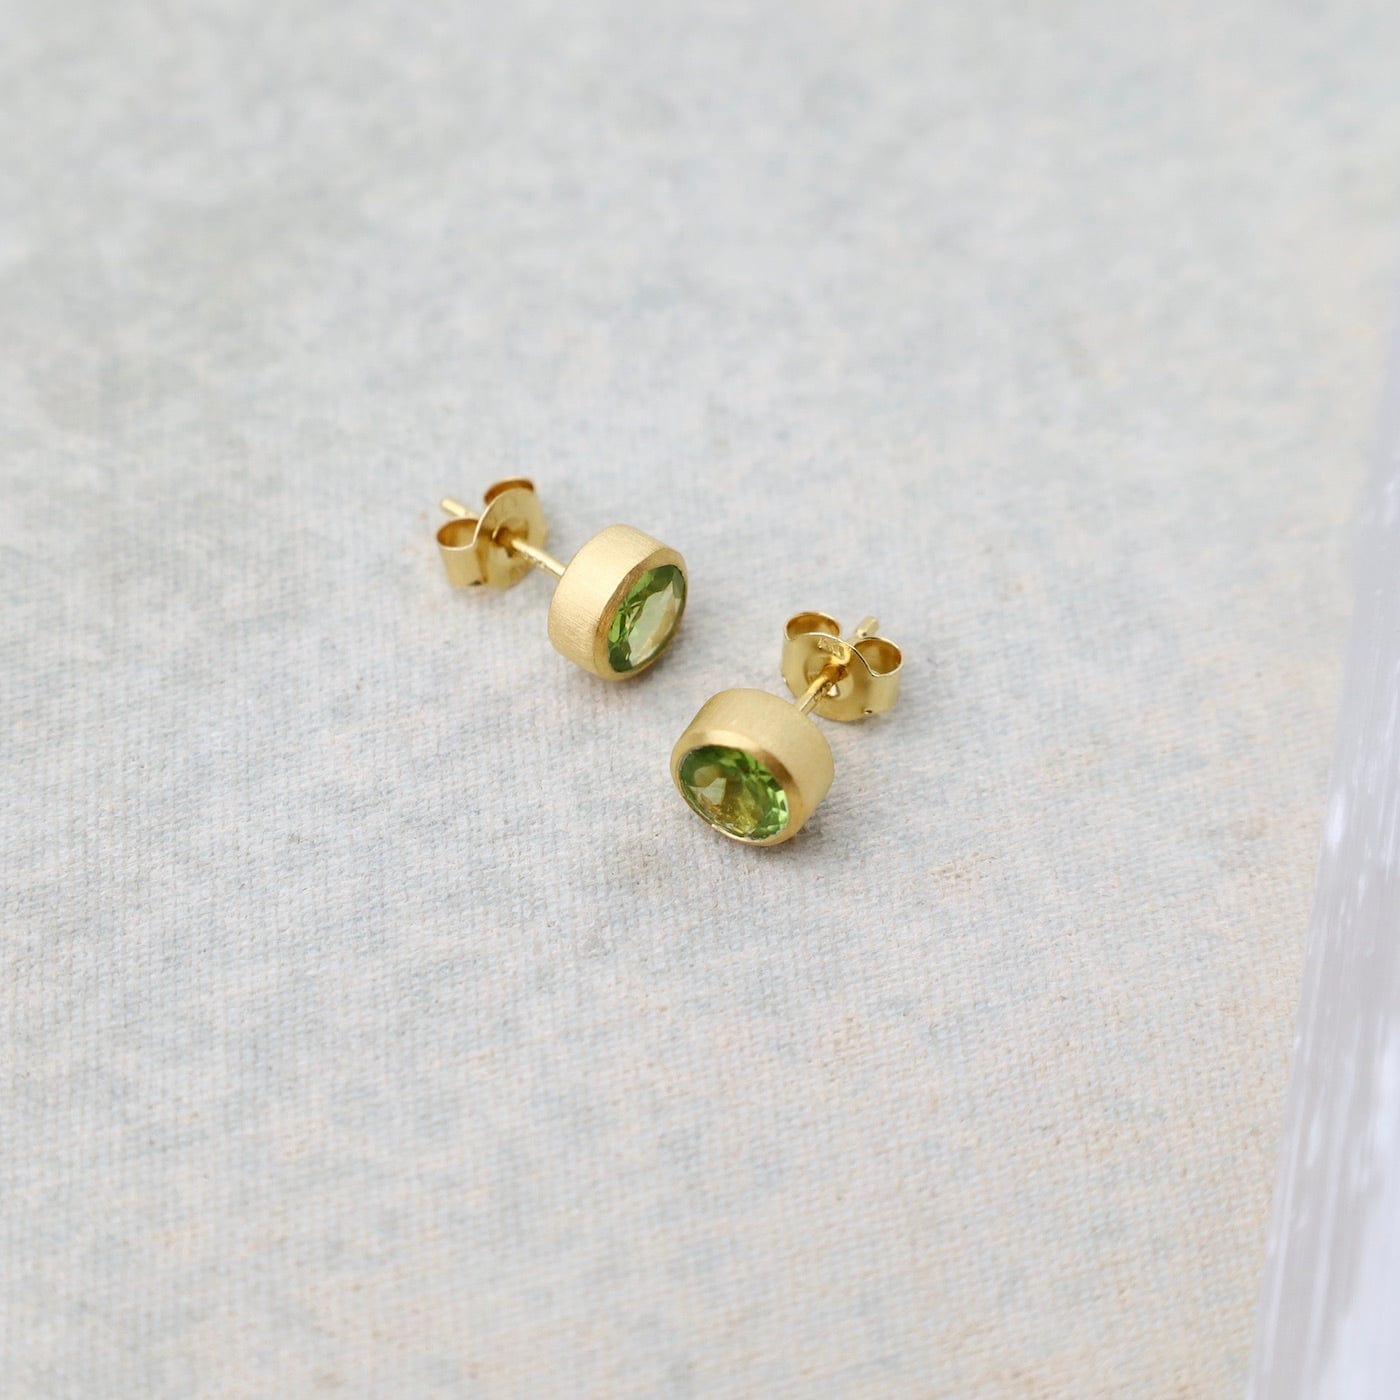 Buy Big 8mm Peridot Stud Earrings Gold 9ct Gold Large 8mm Round Natural AAA Peridot  Earrings Peridot 16th Anniversary August Birthstone Online in India - Etsy